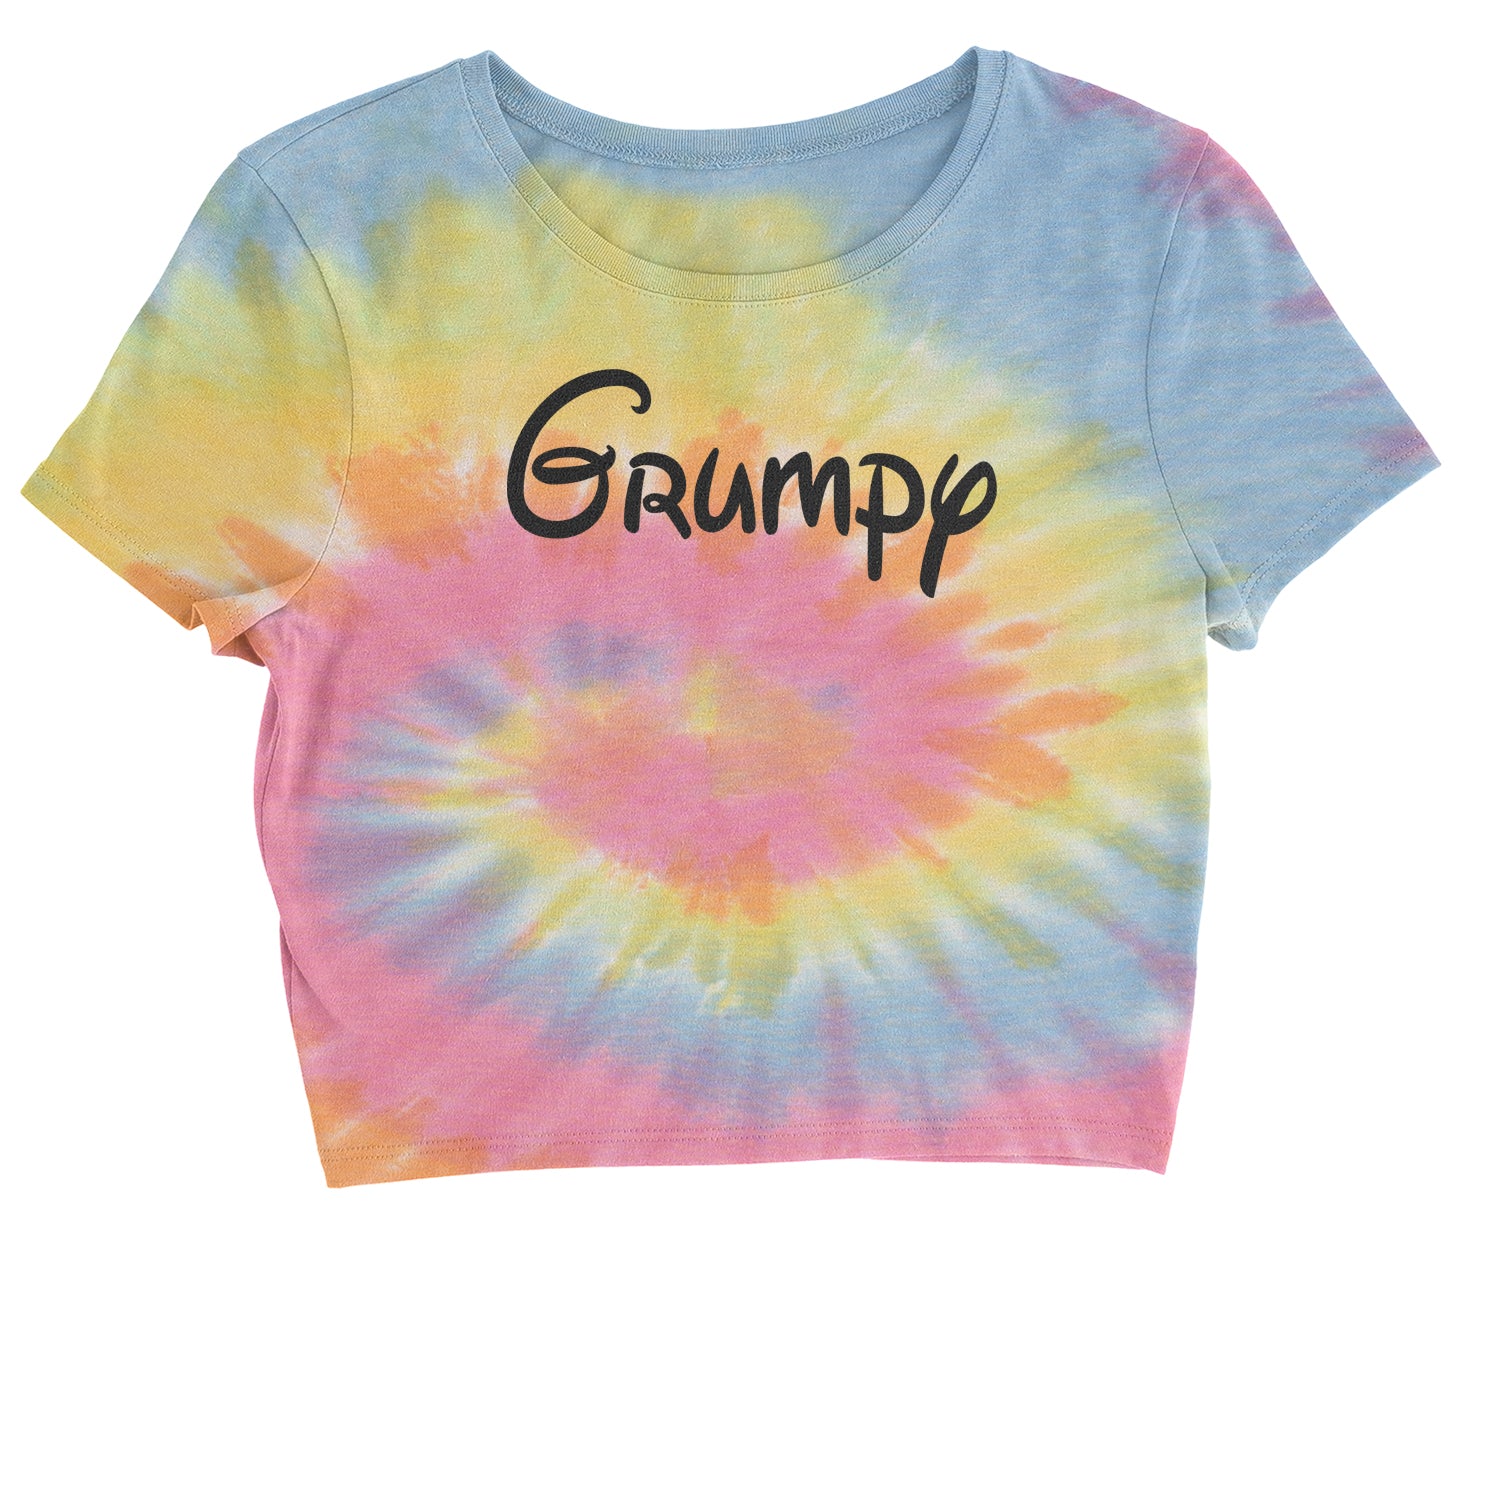 Grumpy - 7 Dwarfs Costume Cropped T-Shirt and, costume, dwarfs, group, halloween, matching, seven, snow, the, white by Expression Tees